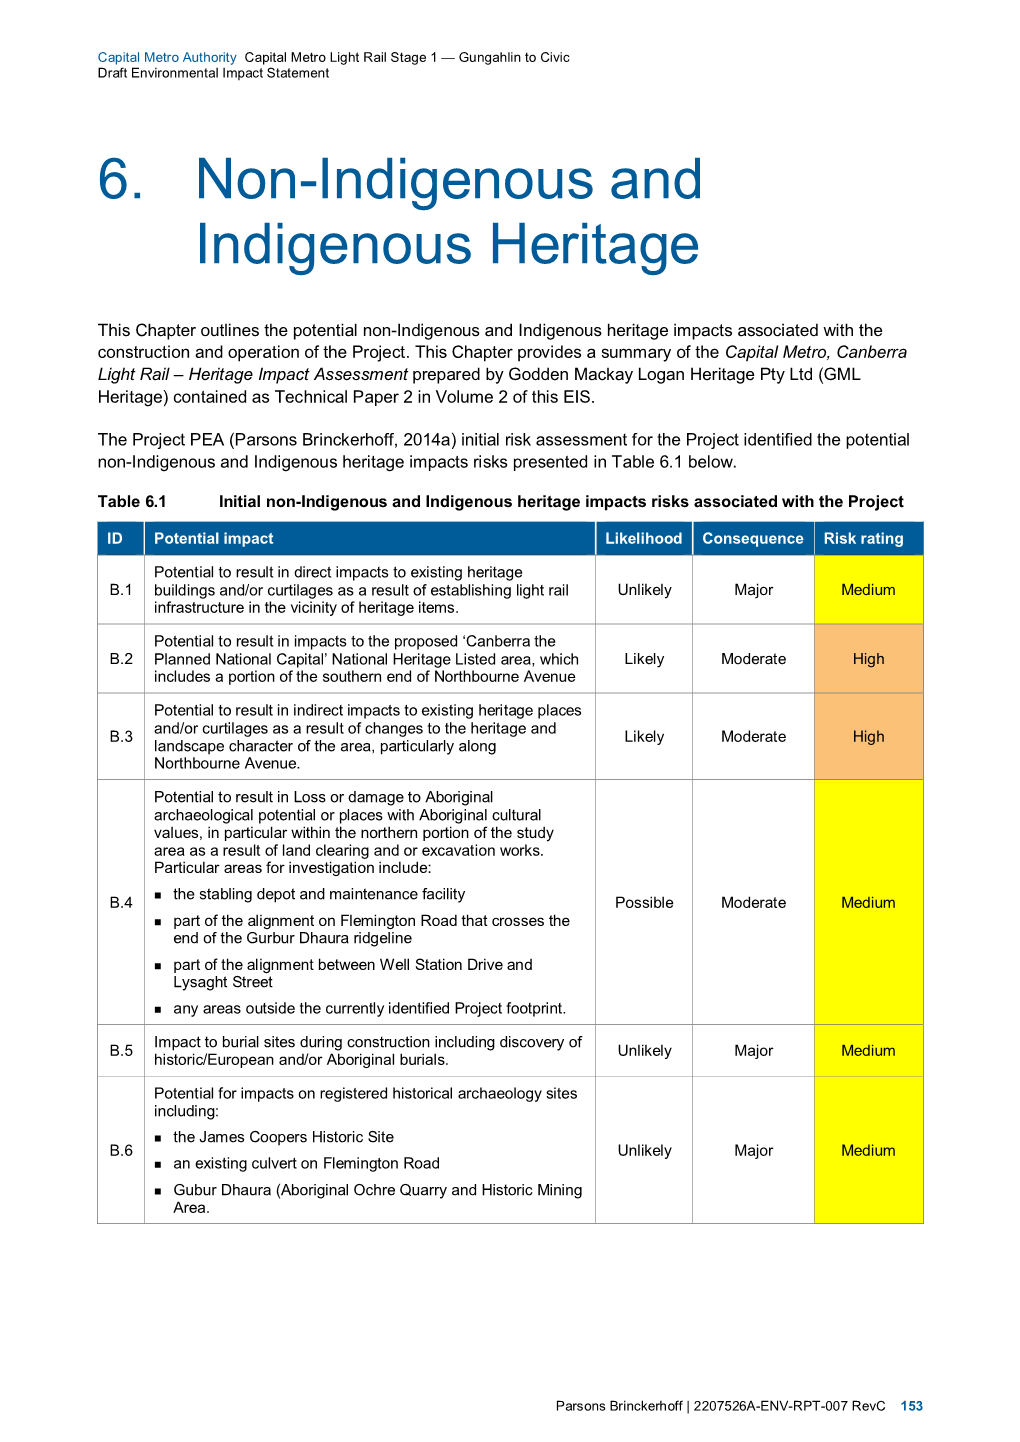 6. Non-Indigenous and Indigenous Heritage